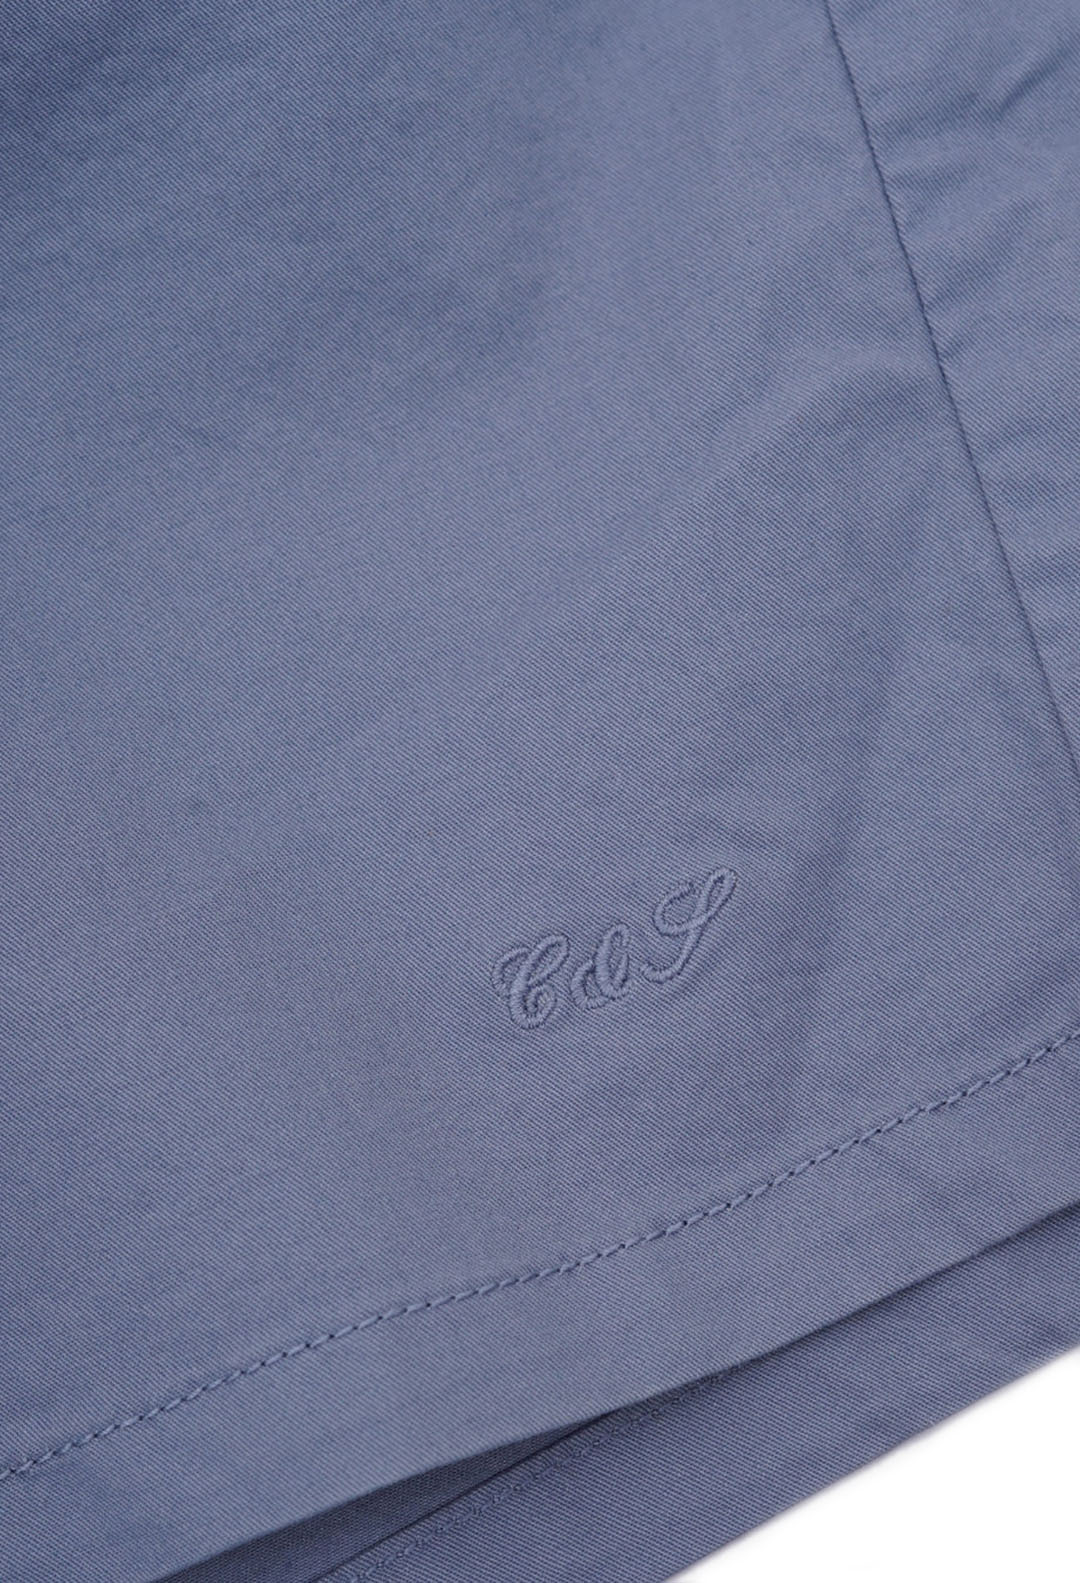 Shorts Light Twill in Cornflower Shorts Colours and Sons   